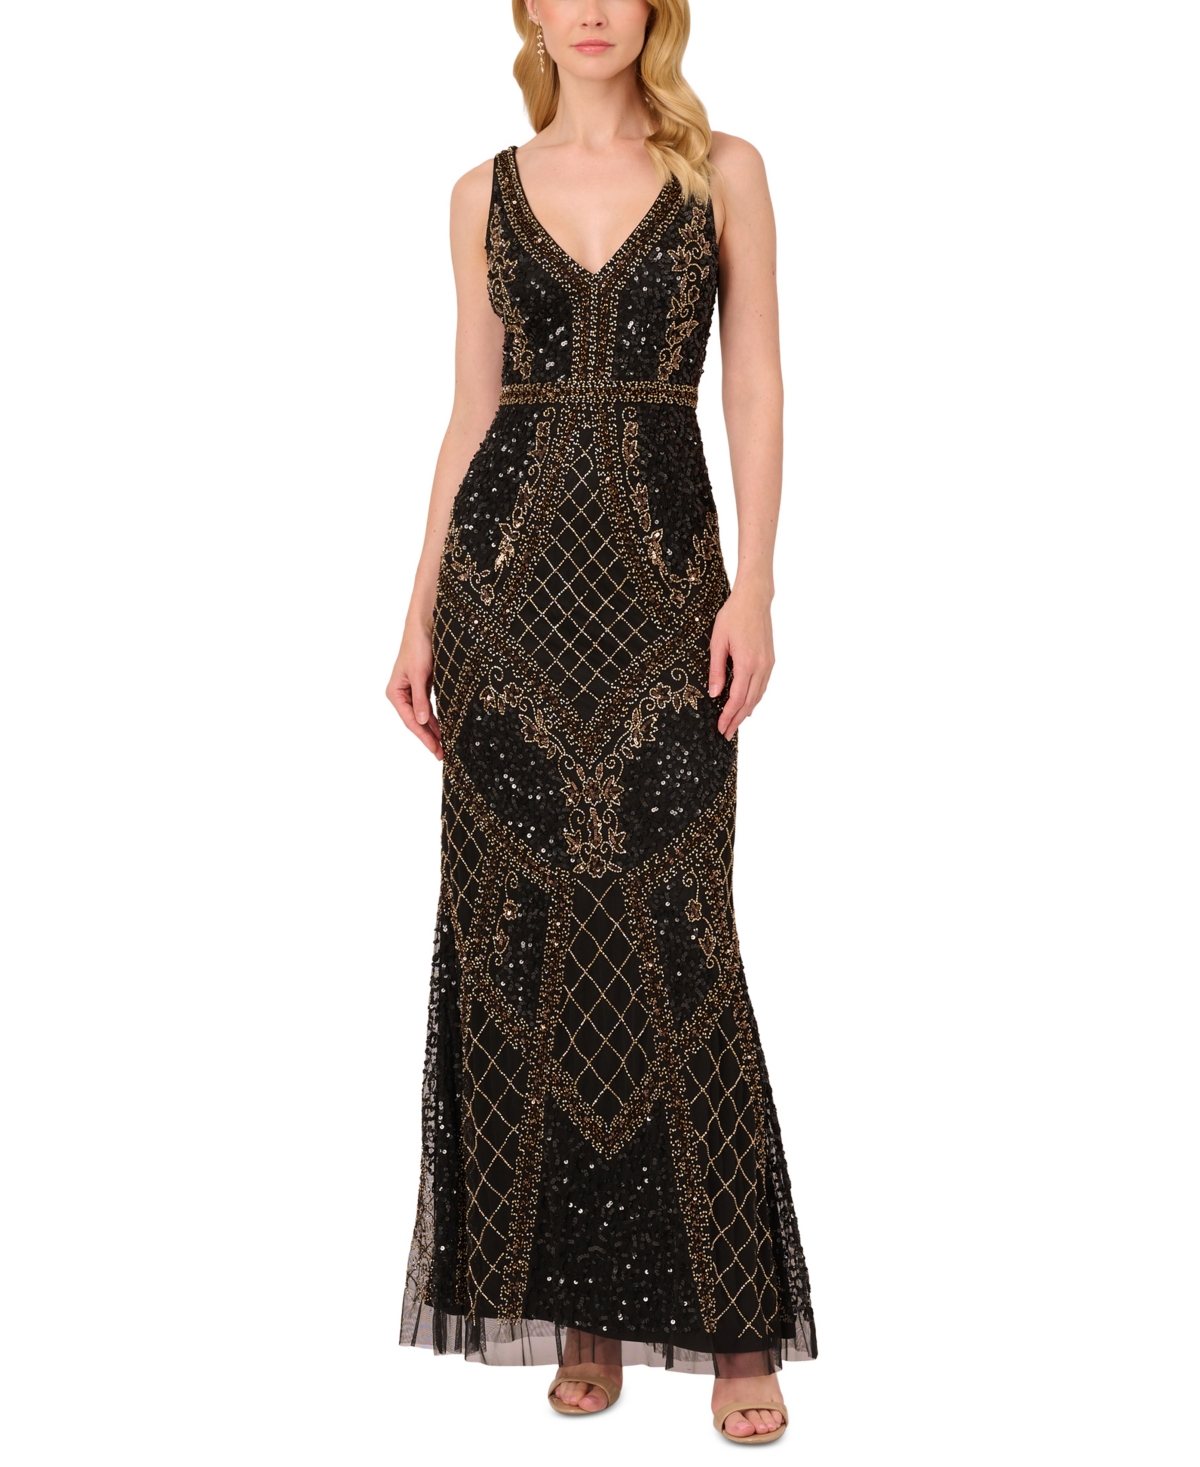 Great Gatsby Dress – Great Gatsby Dresses for Sale Adrianna Papell Womens Beaded Mesh Column Gown - Black Gold $349.00 AT vintagedancer.com